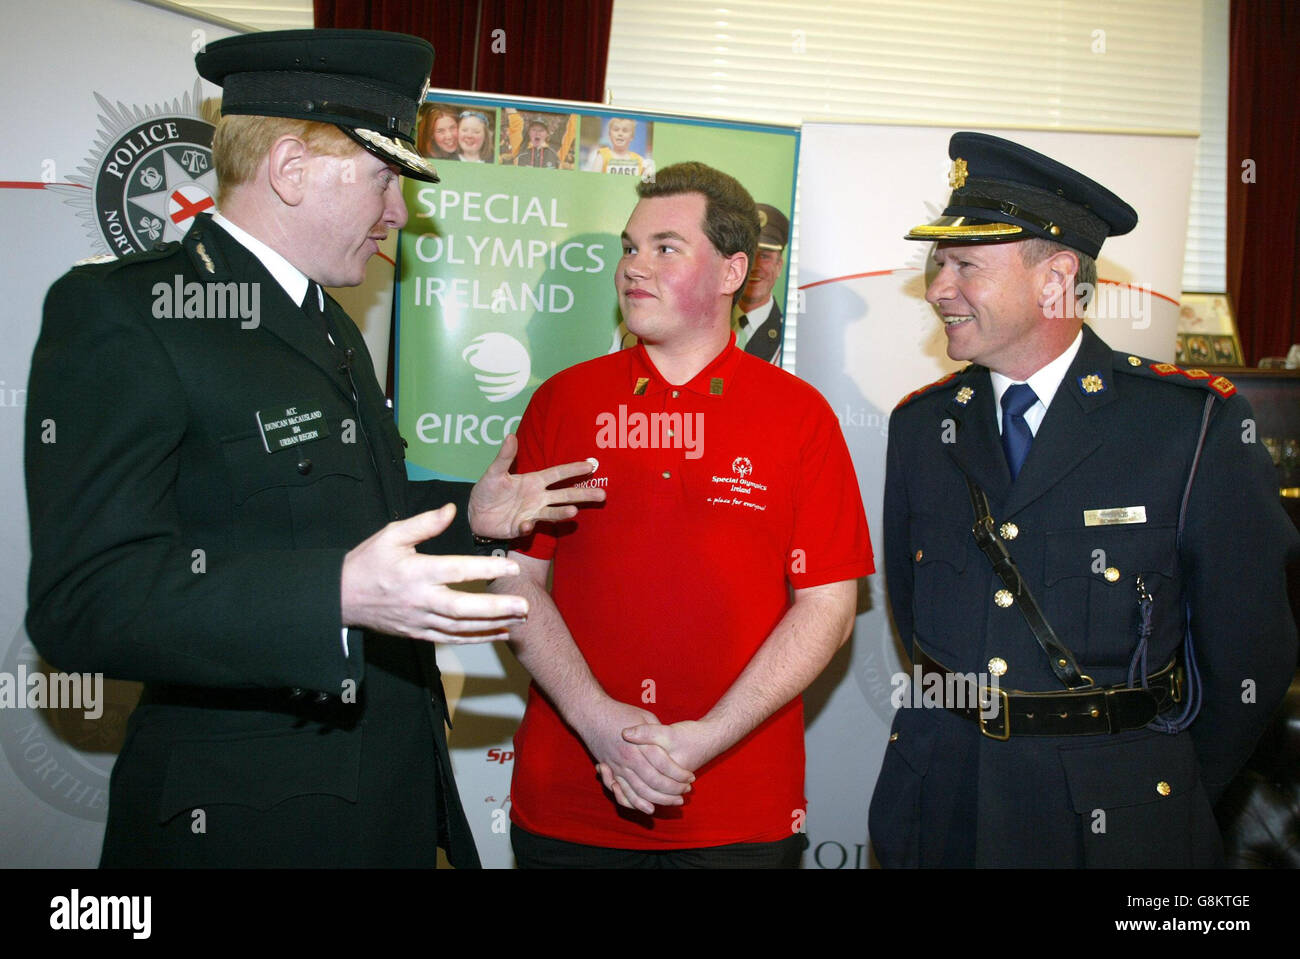 Police service of Northern Ireland assistant Chief Constable Duncan McCausland (left) and Garda Chief Superintendent Colm Rooney, chat with Paul Nugent, a Special Olympics athlete from Warrenpoint Co Down, Friday 2nd September 2005 in Belfast. During the launch of a new training programme for both police services in Ireland to help recruits with the skills to deal with people with special needs. The Special Olympics Law Enforcement programme has been developed by all three organisations for recruits to both police forces and will see them following a common curriculum at Garnerville Police Stock Photo